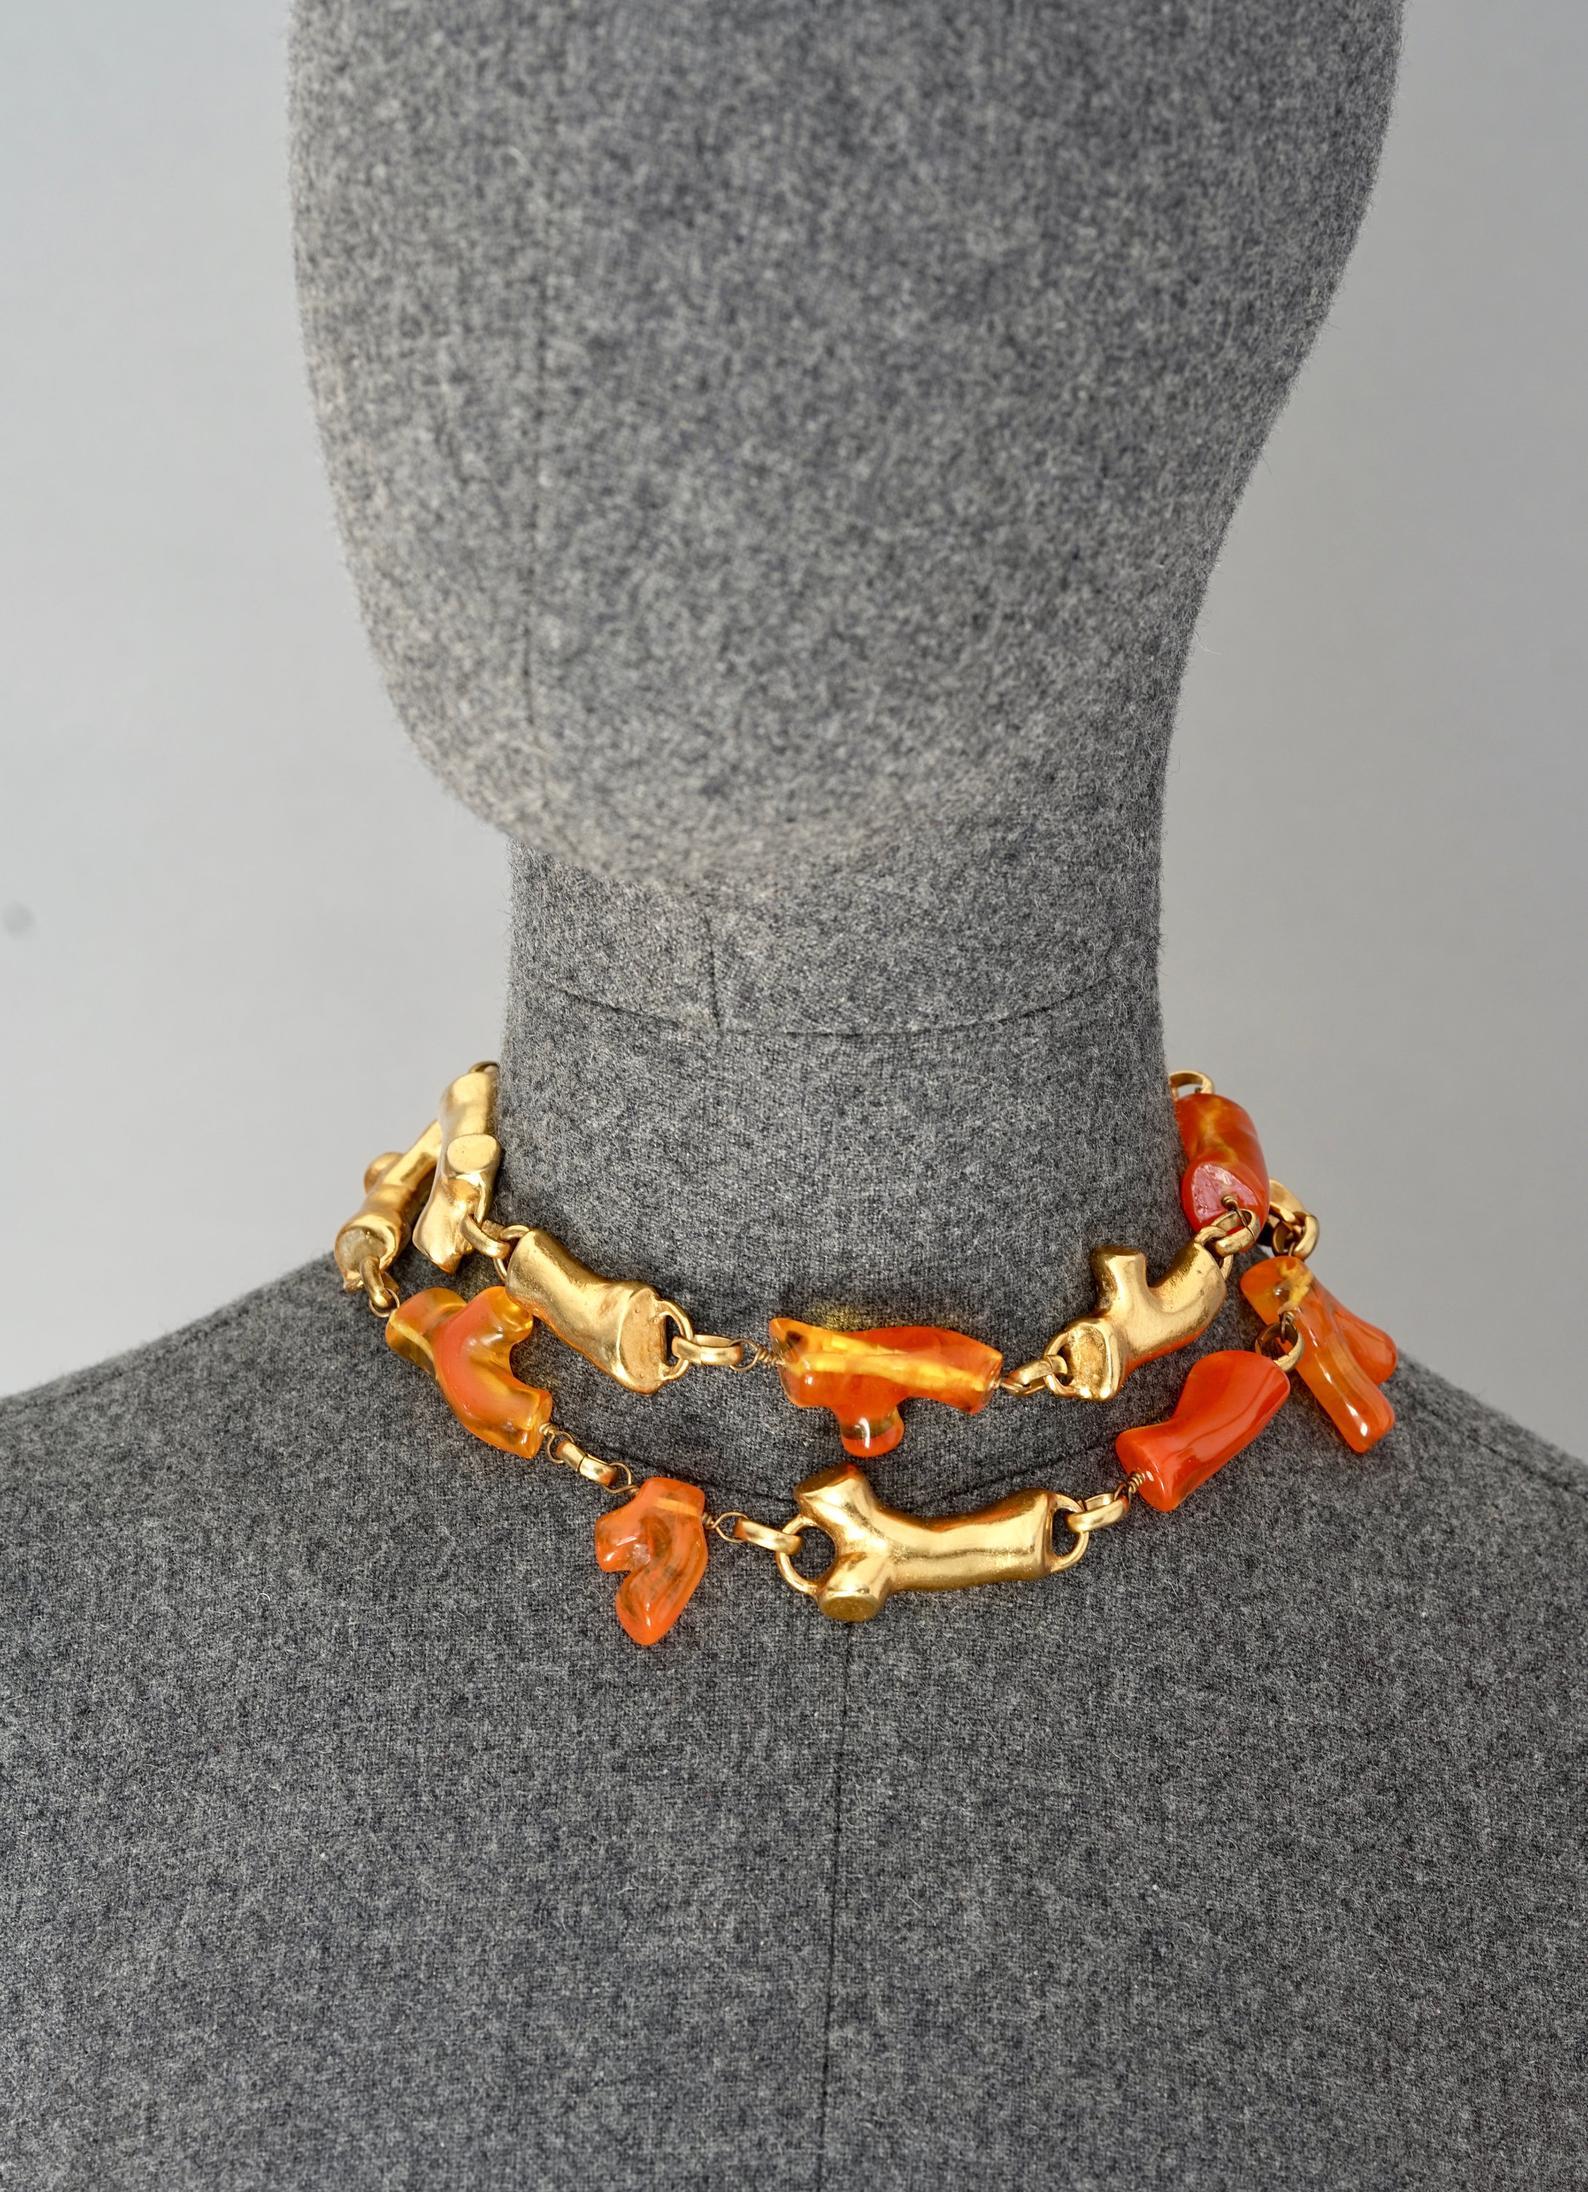 Vintage CHRISTIAN LACROIX Coral Lucite Multi Strand Necklace

Measurements:
Height: 2 inches (5 cm)
Wearable Length: 14.17 inches (36 cm)

Features:
- 100% Authentic CHRISTIAN LACROIX.
- Two tiered coral links in lucite orange and gold tone.
-